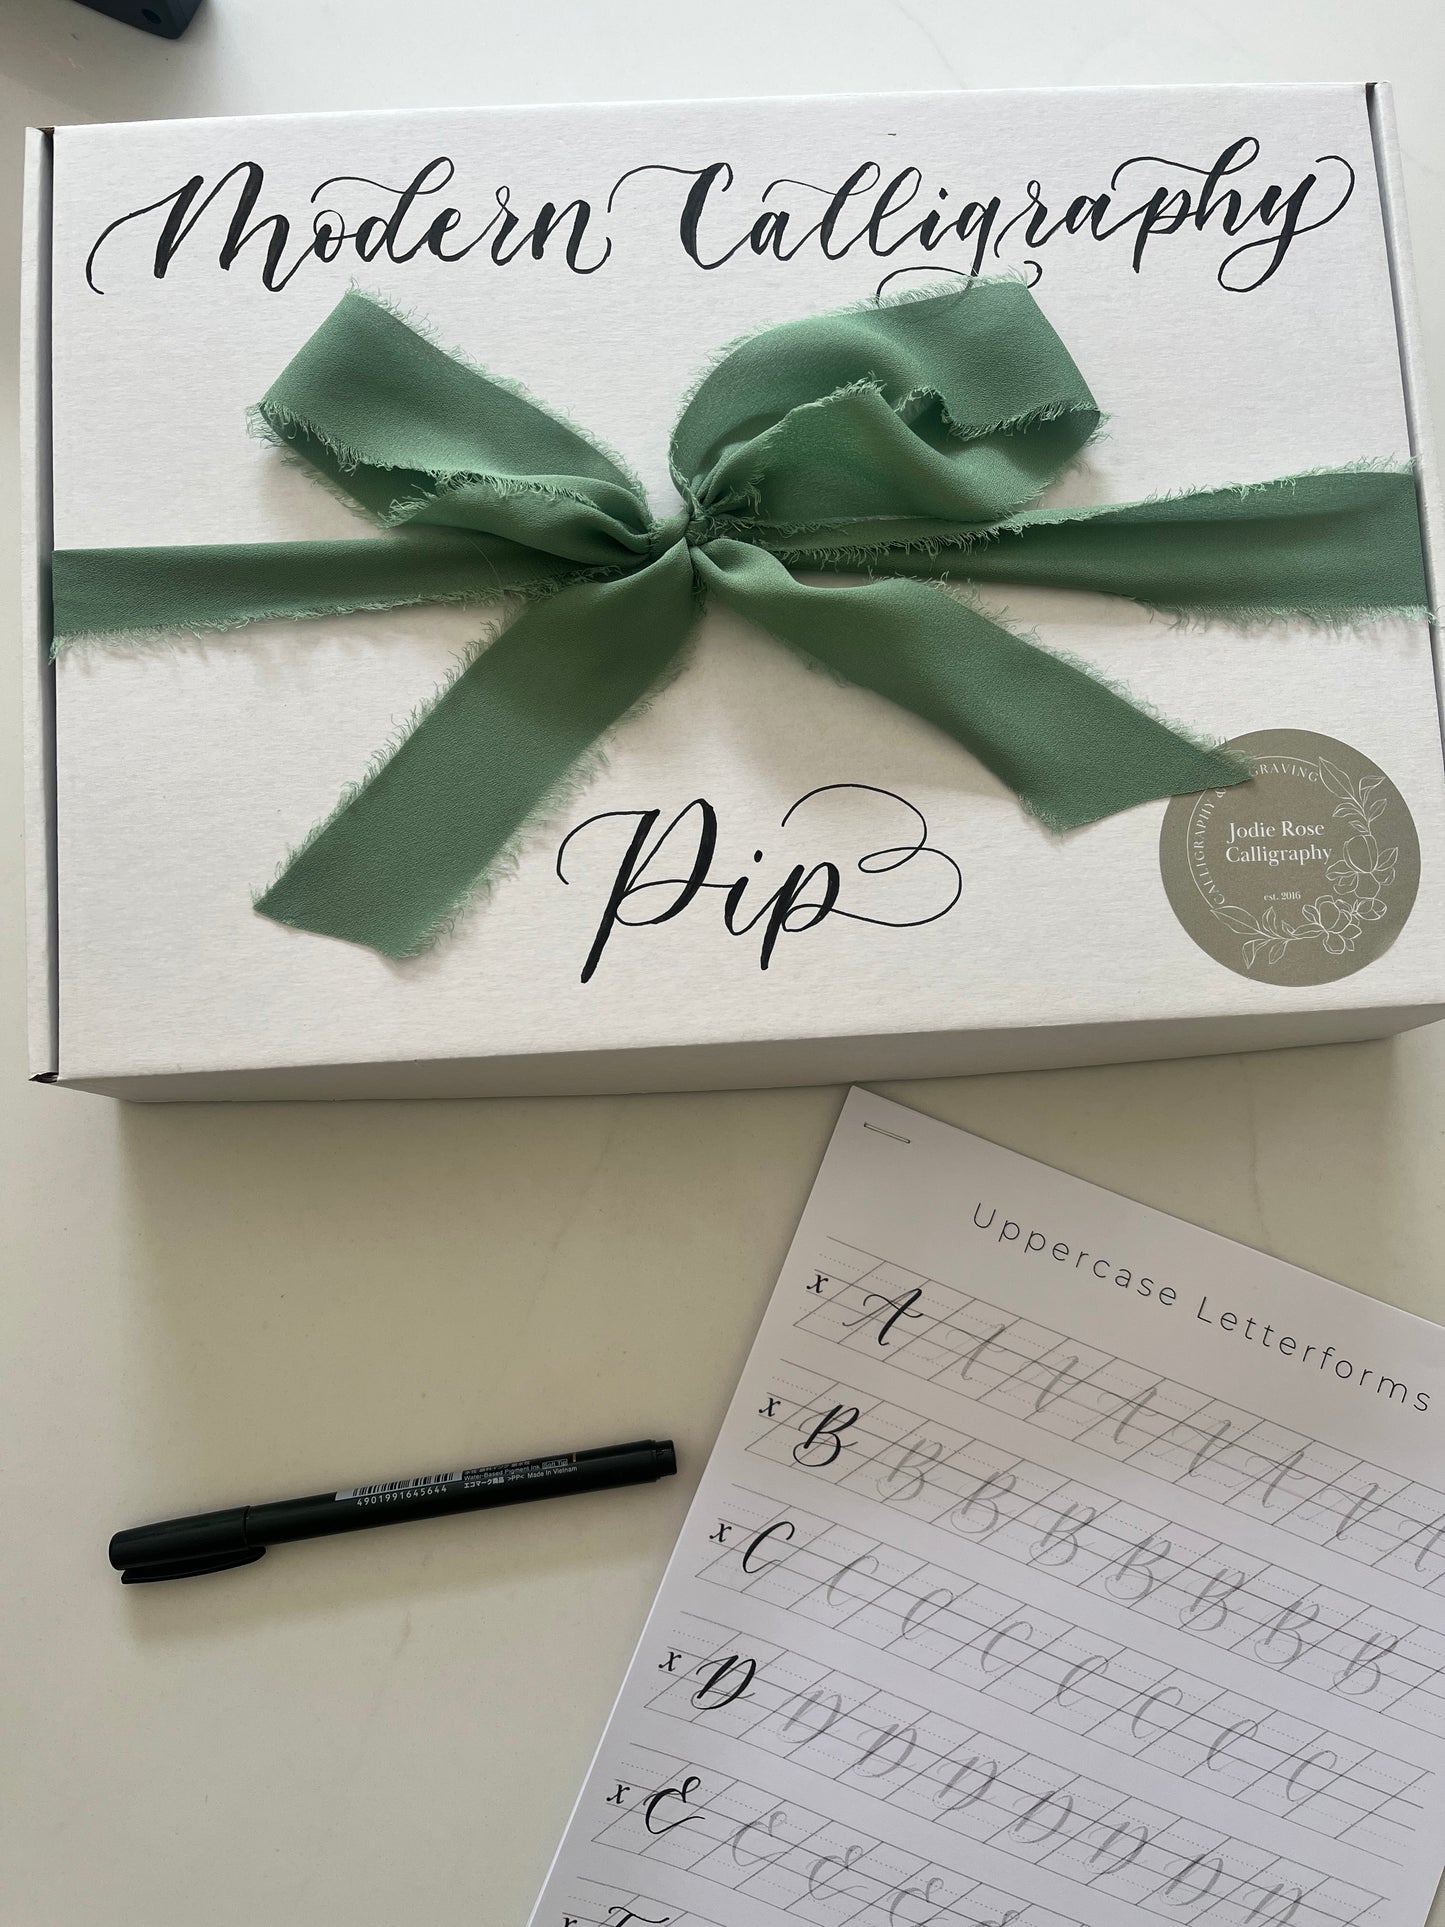 Modern calligraphy starter kit with pen, nib, ink and practice sheets for beginners and improvers in a personalised gift box, great for crafty and arty friends and family, Hampshire and Surrey UK